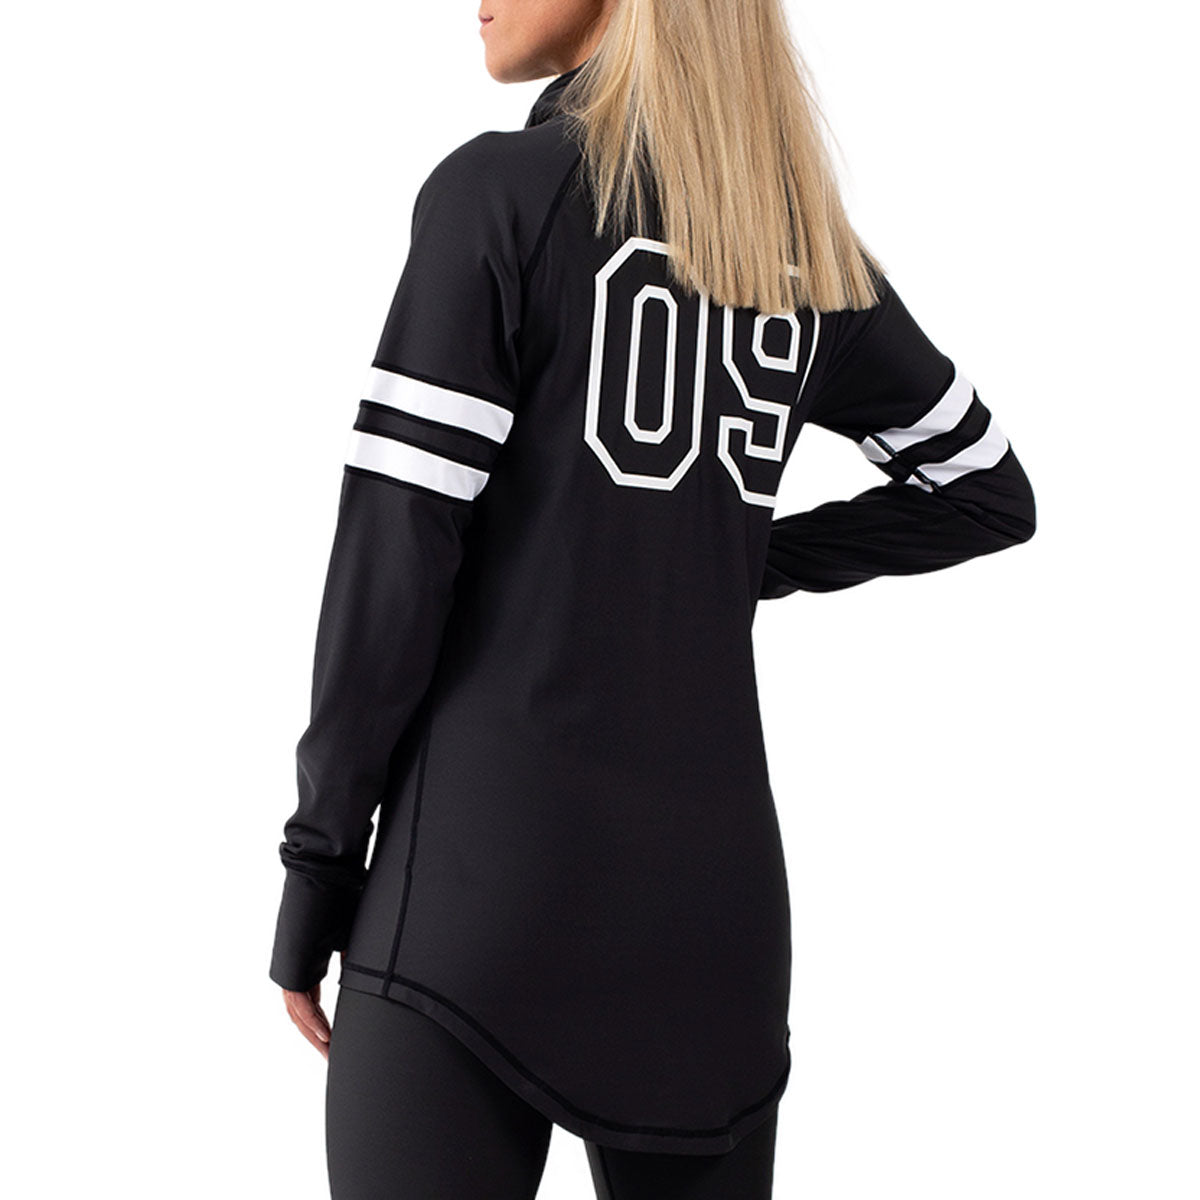 Eivy Icecold Top Snowboard Base Layer - Team Black image 2